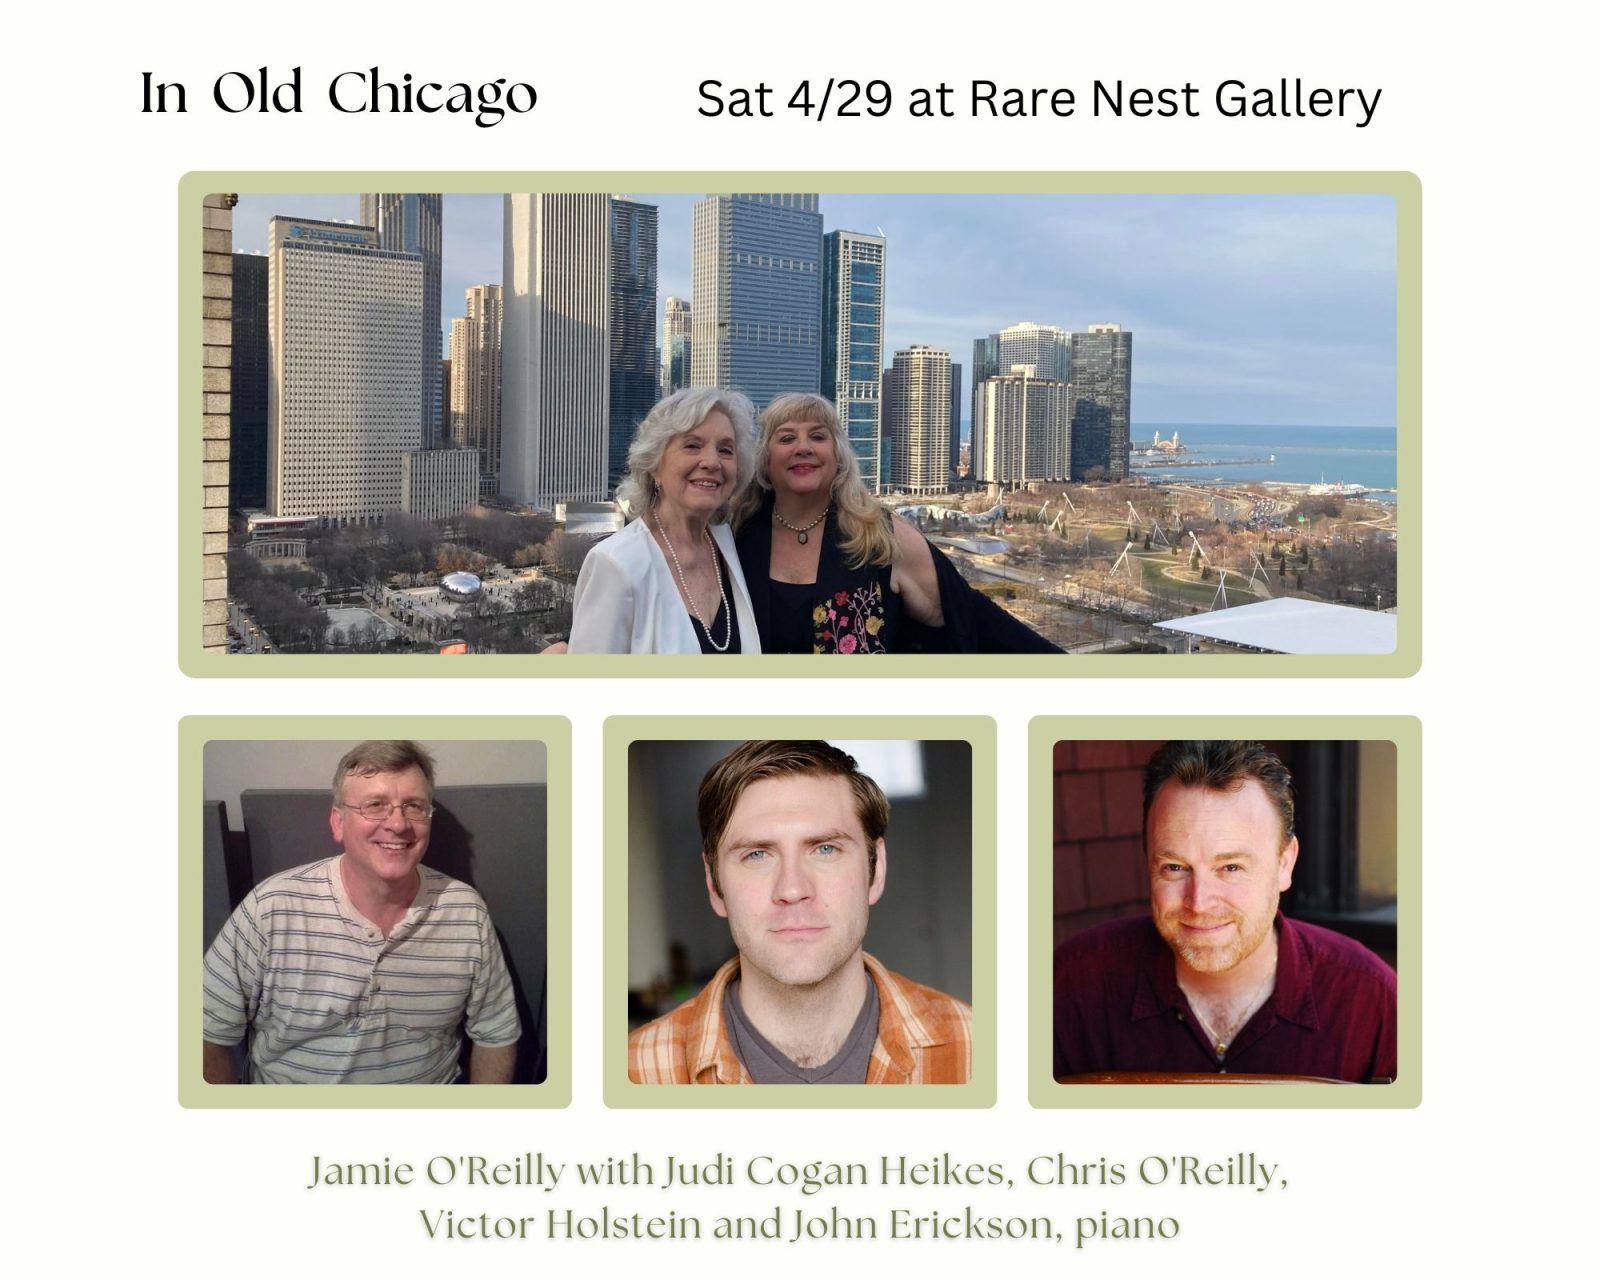 In Old Chicago on WFMT Radio - J. O'Reilly Productions, Cultural